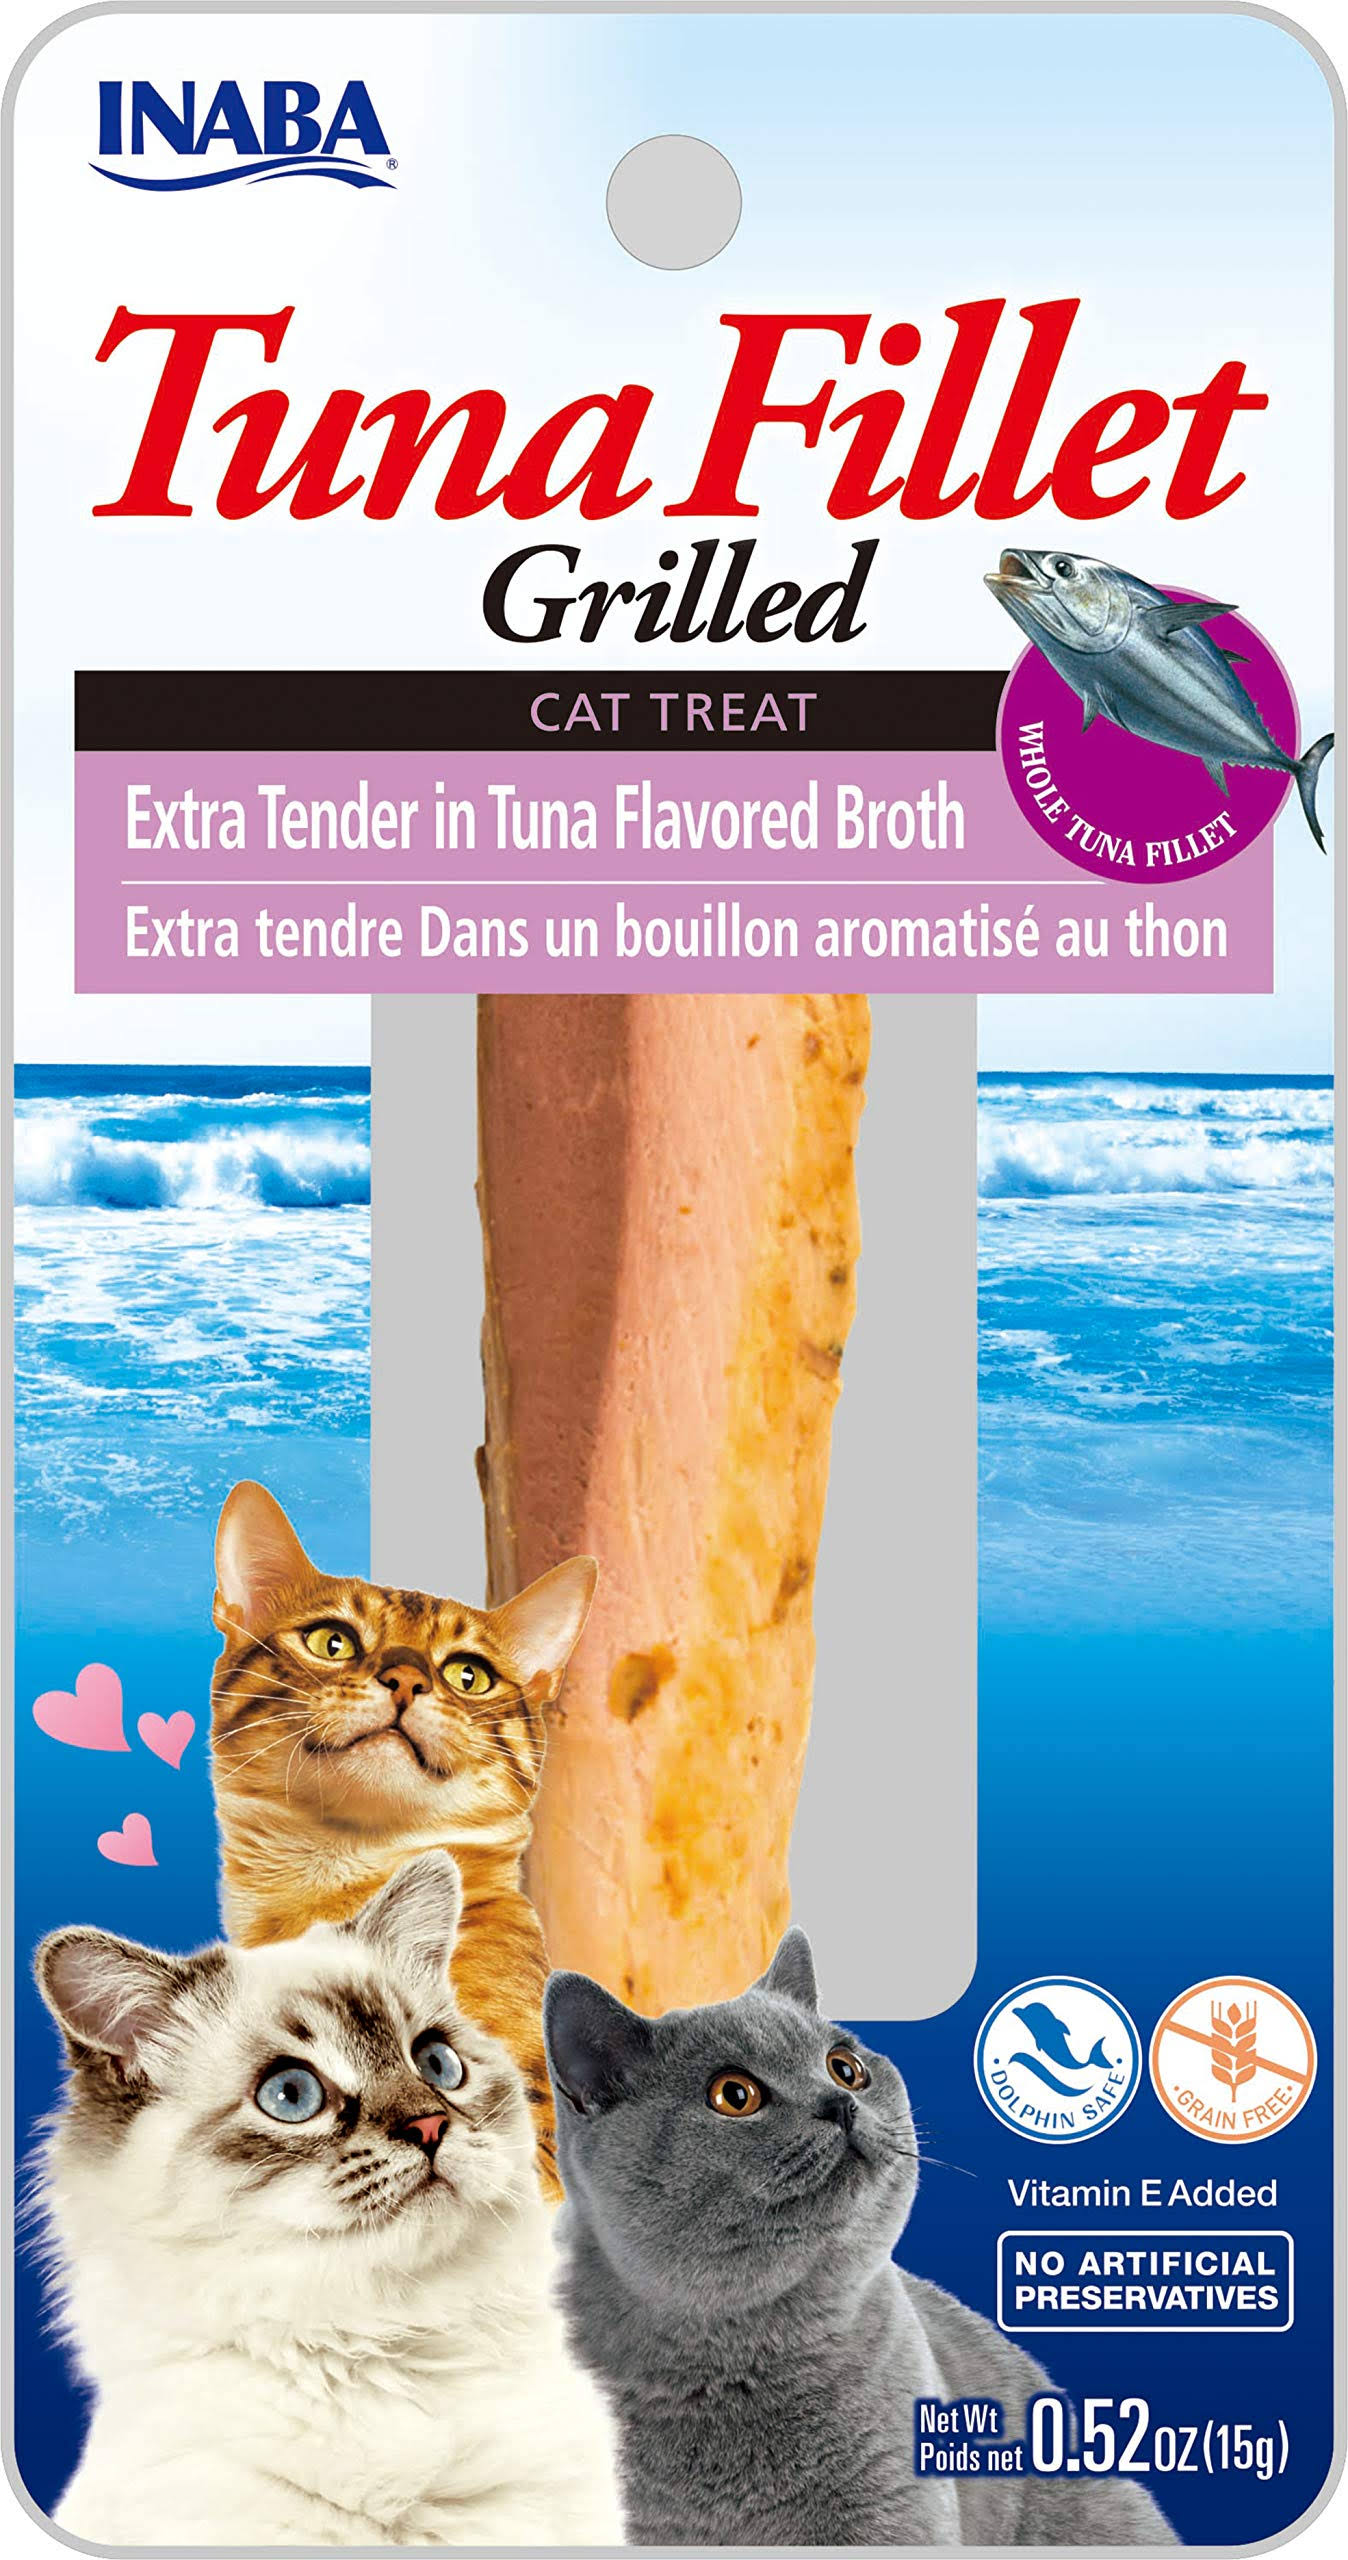 Inaba Tuna Fillet Grilled Cat Treat Extra Tender in Tuna Flavored Broth